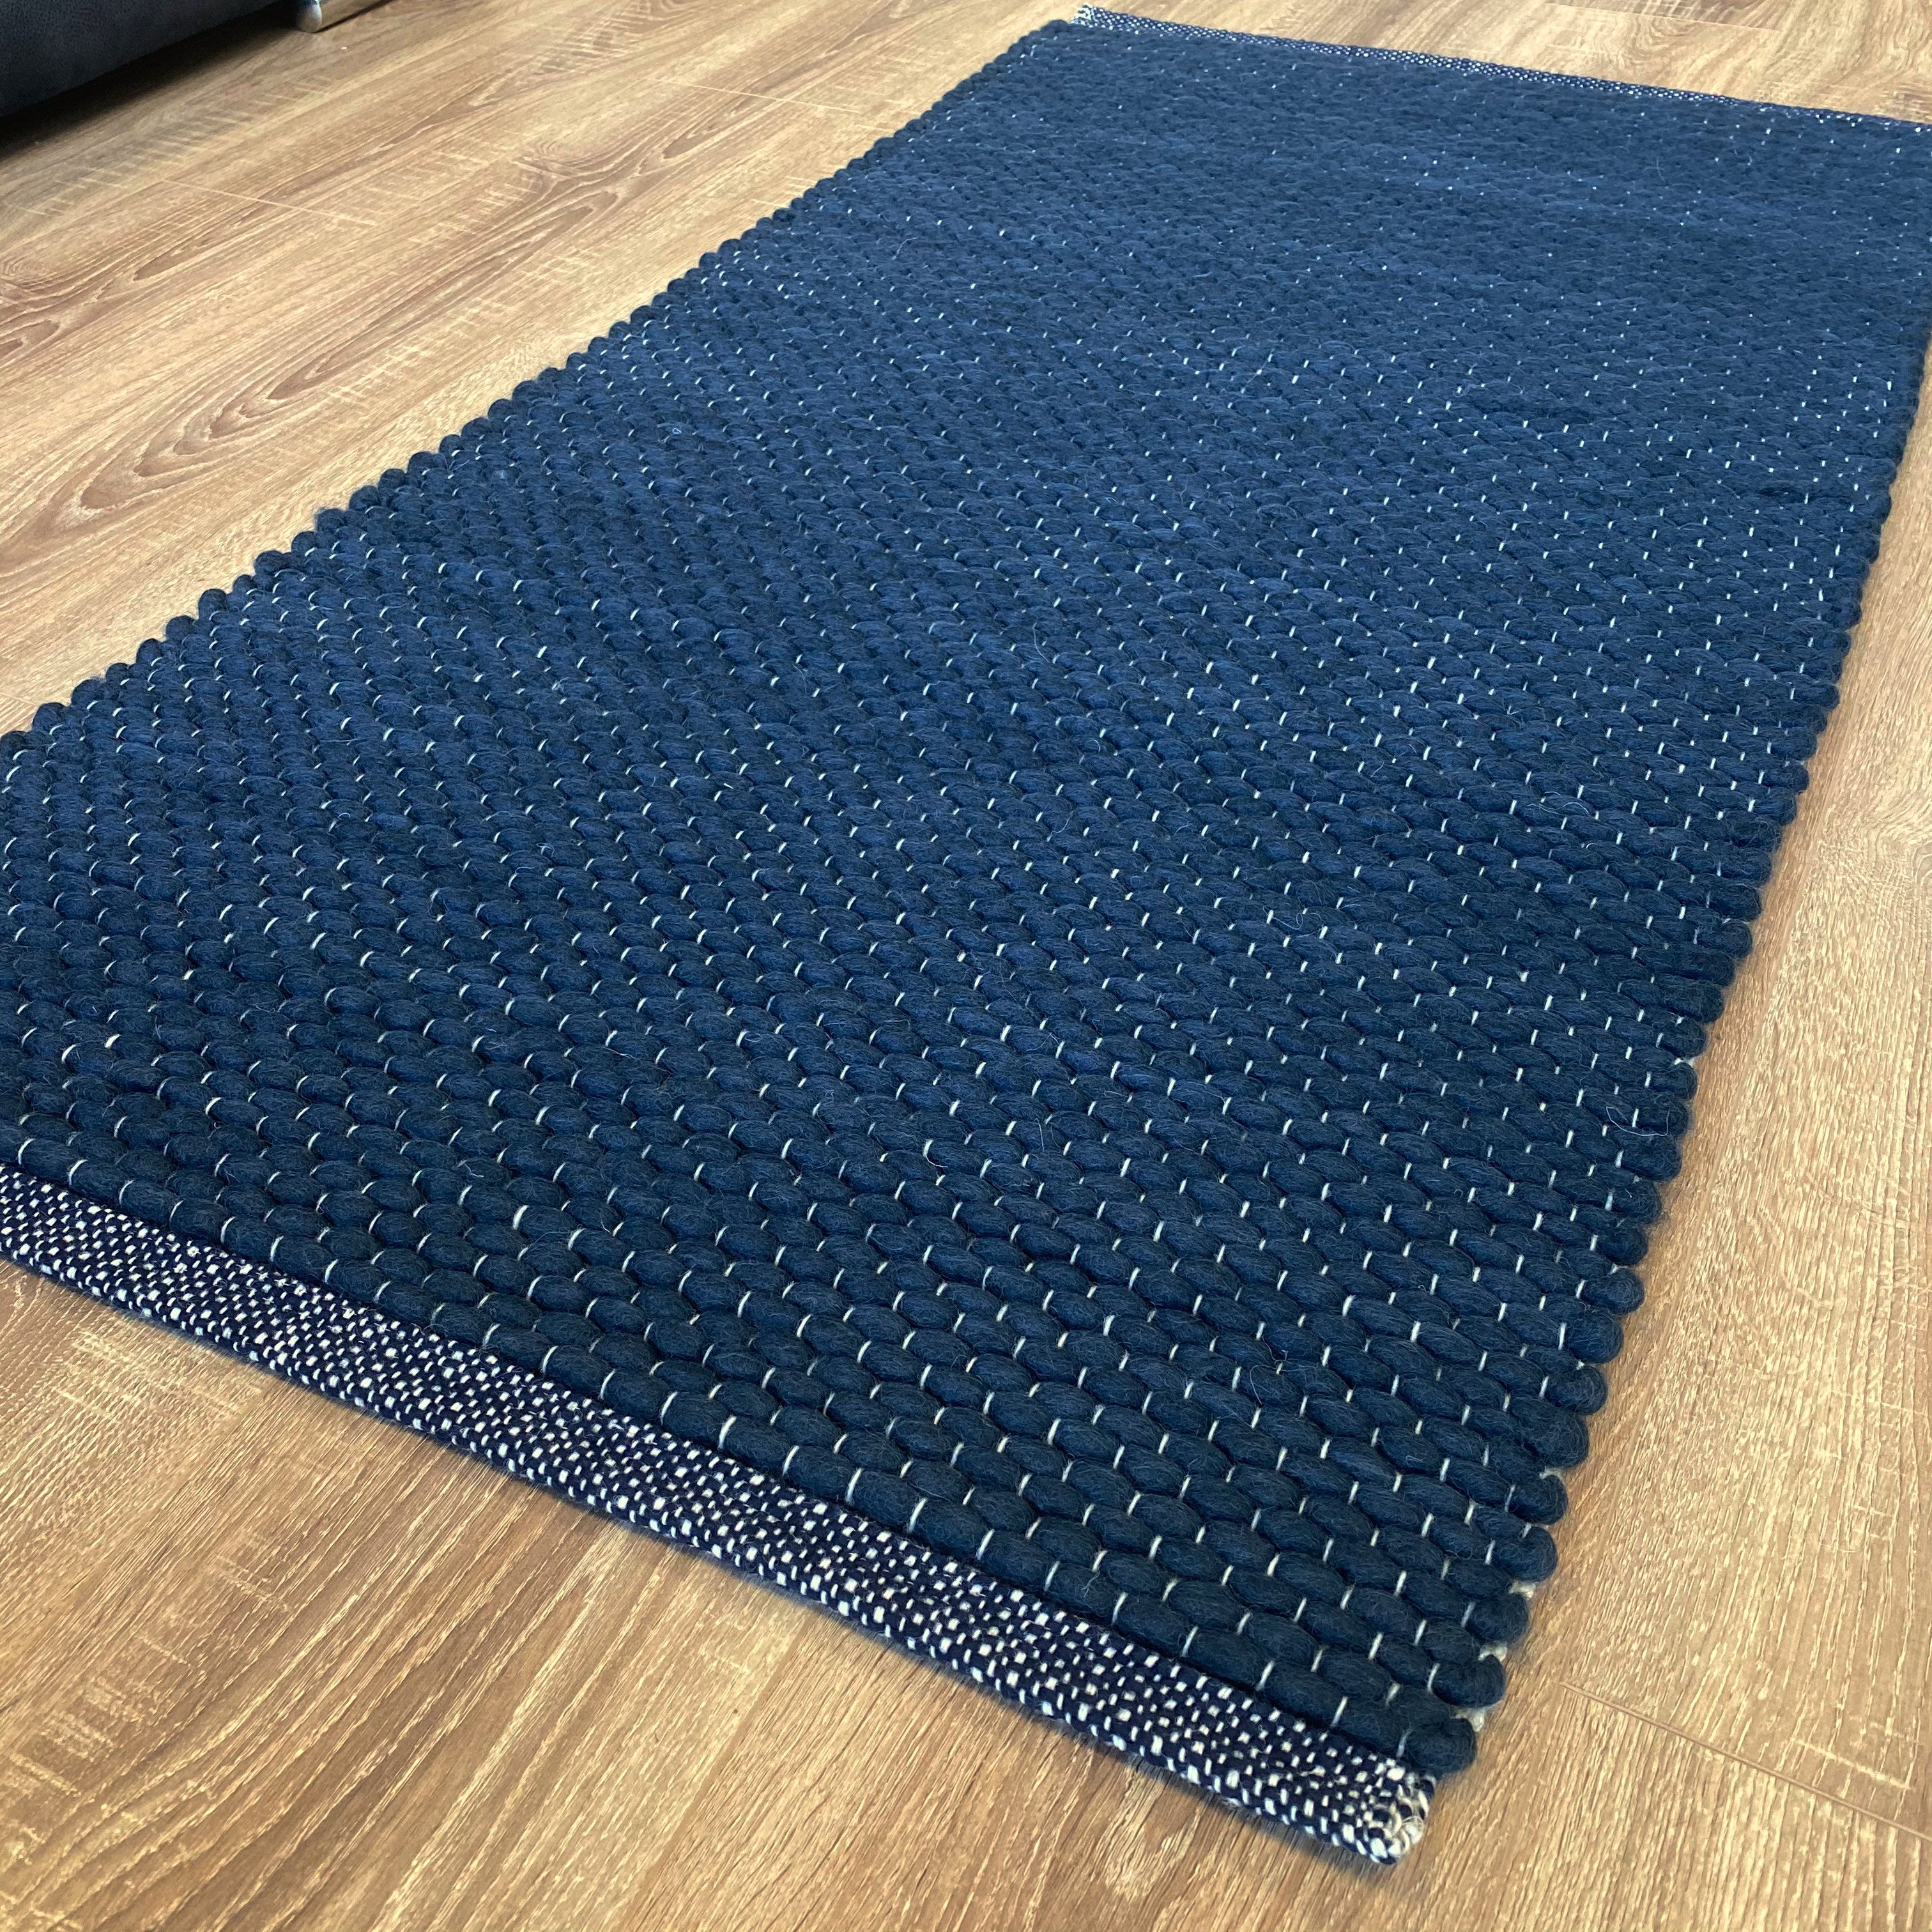 An image of Hermes Hand Woven Wool Rug Thick Loom - Deep Blue 120x180cm